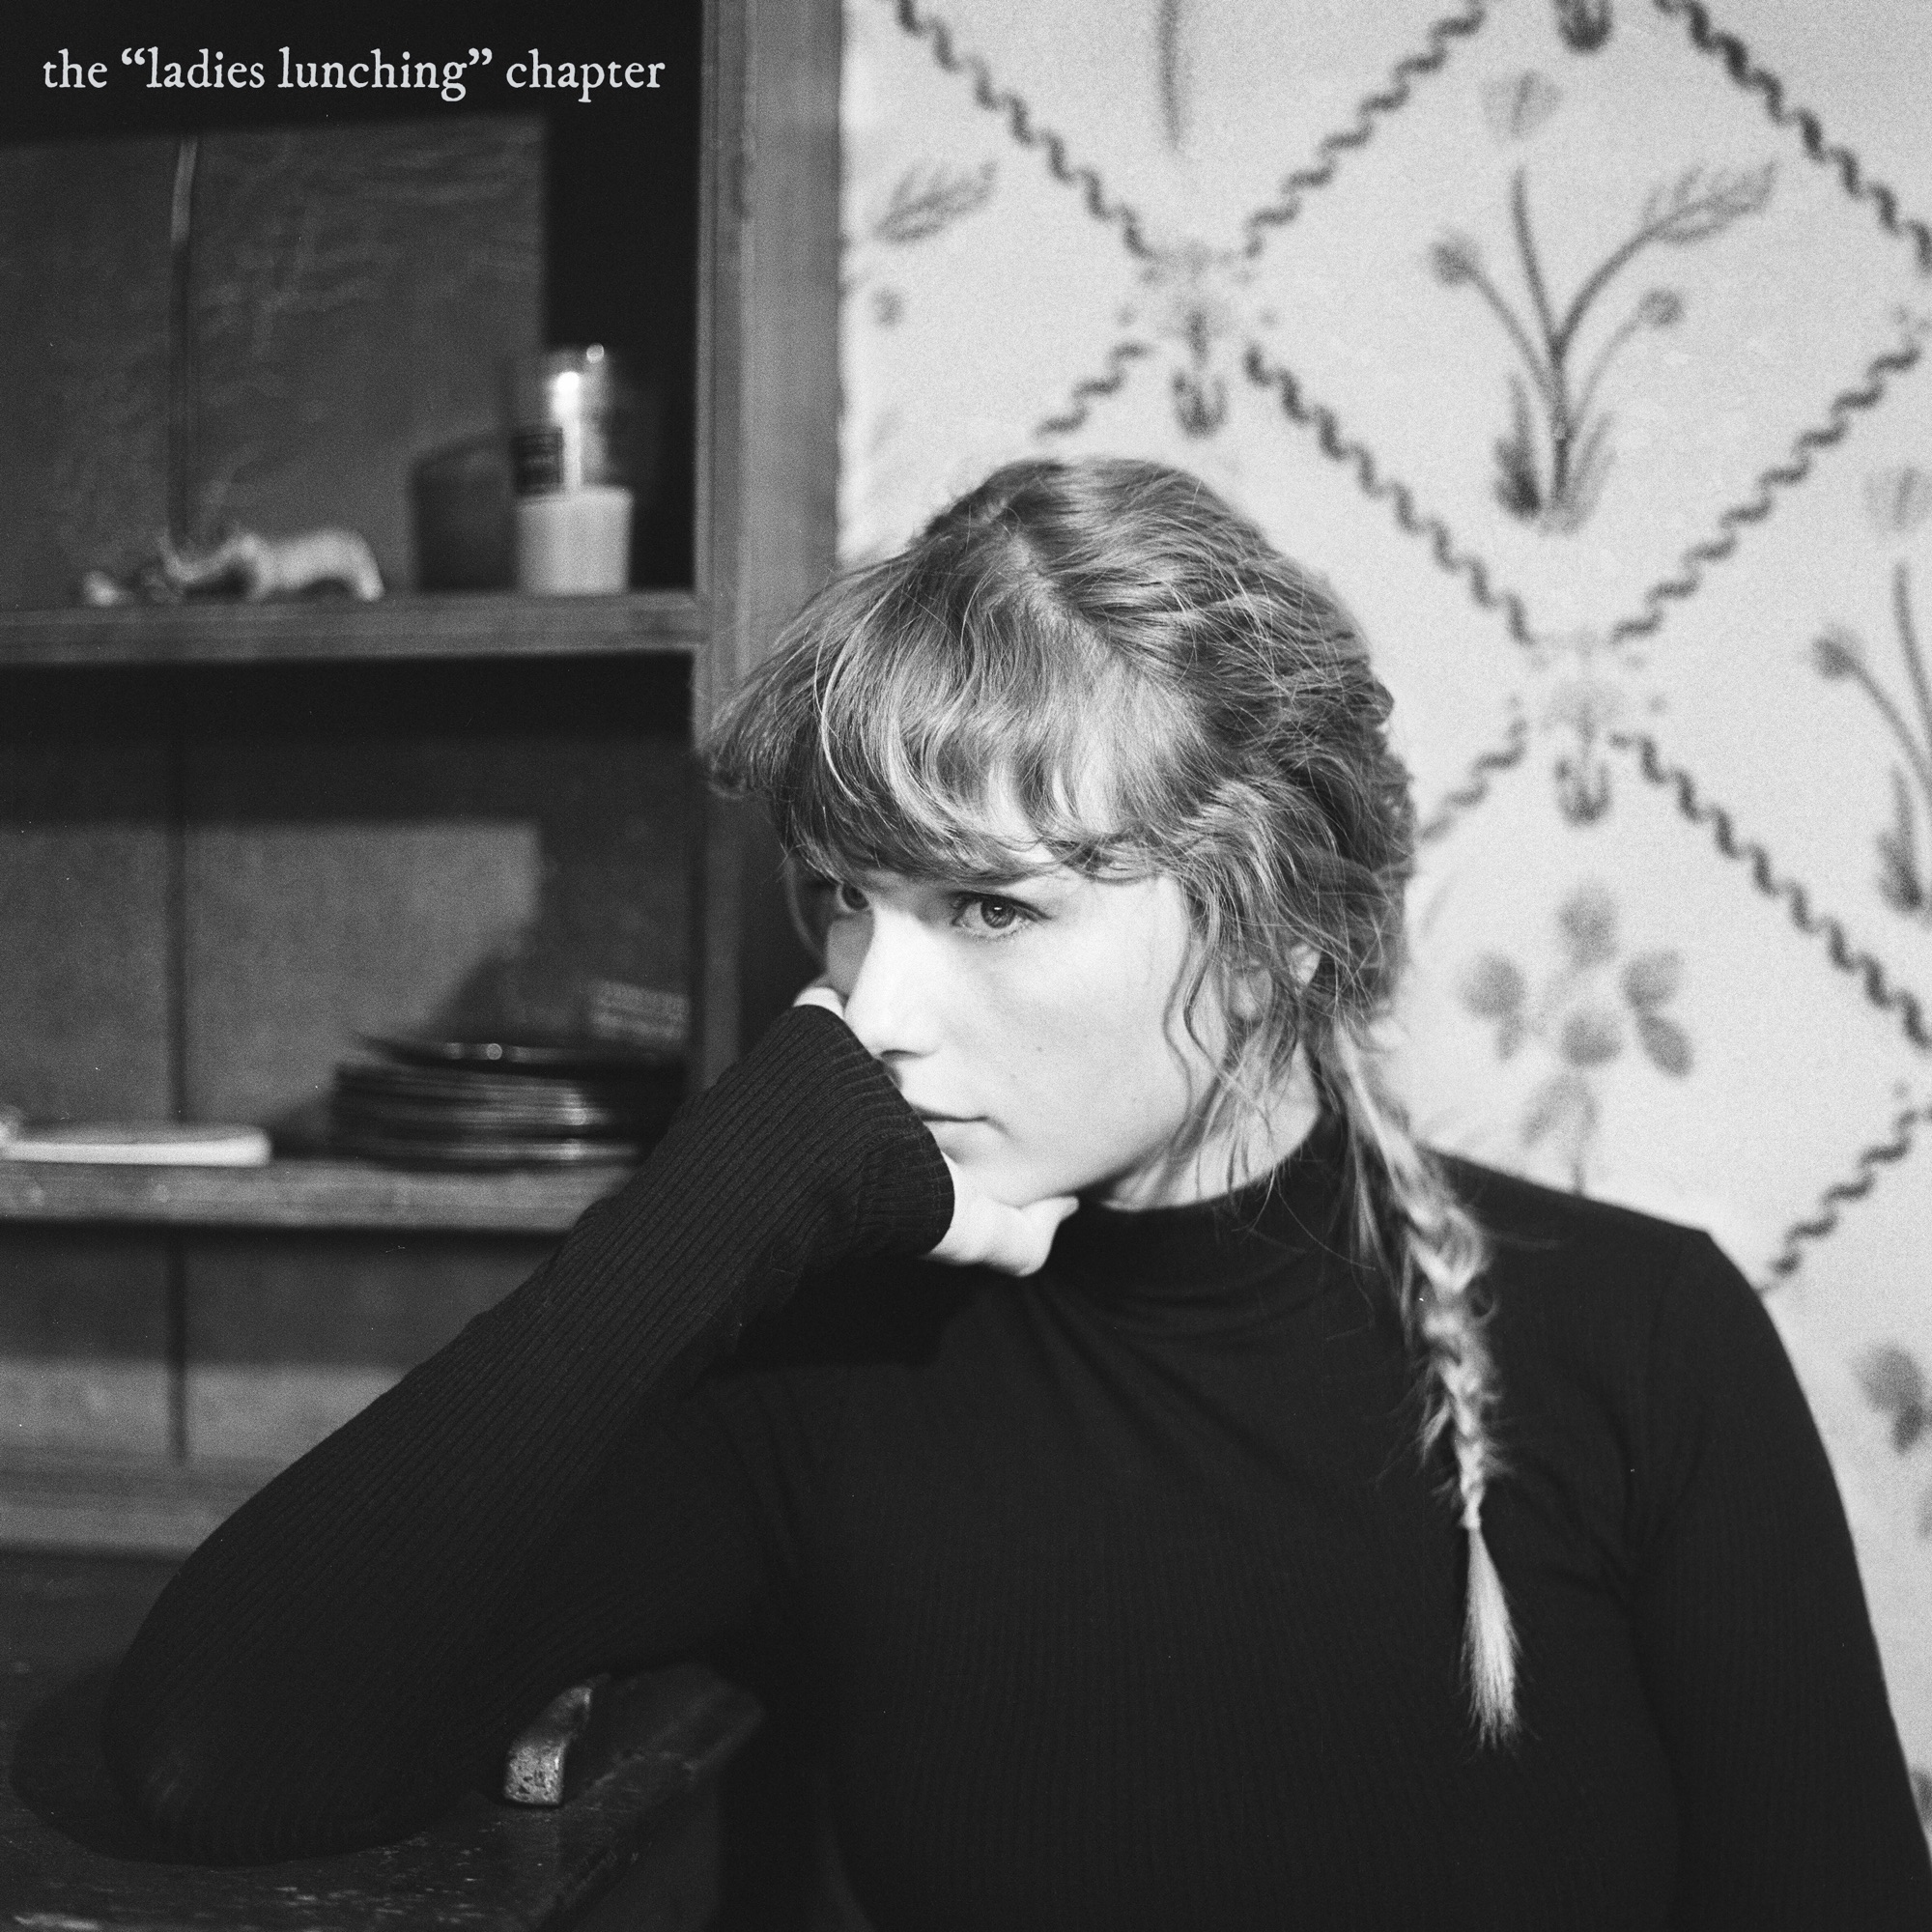 Taylor Swift - the "ladies lunching" chapter - EP